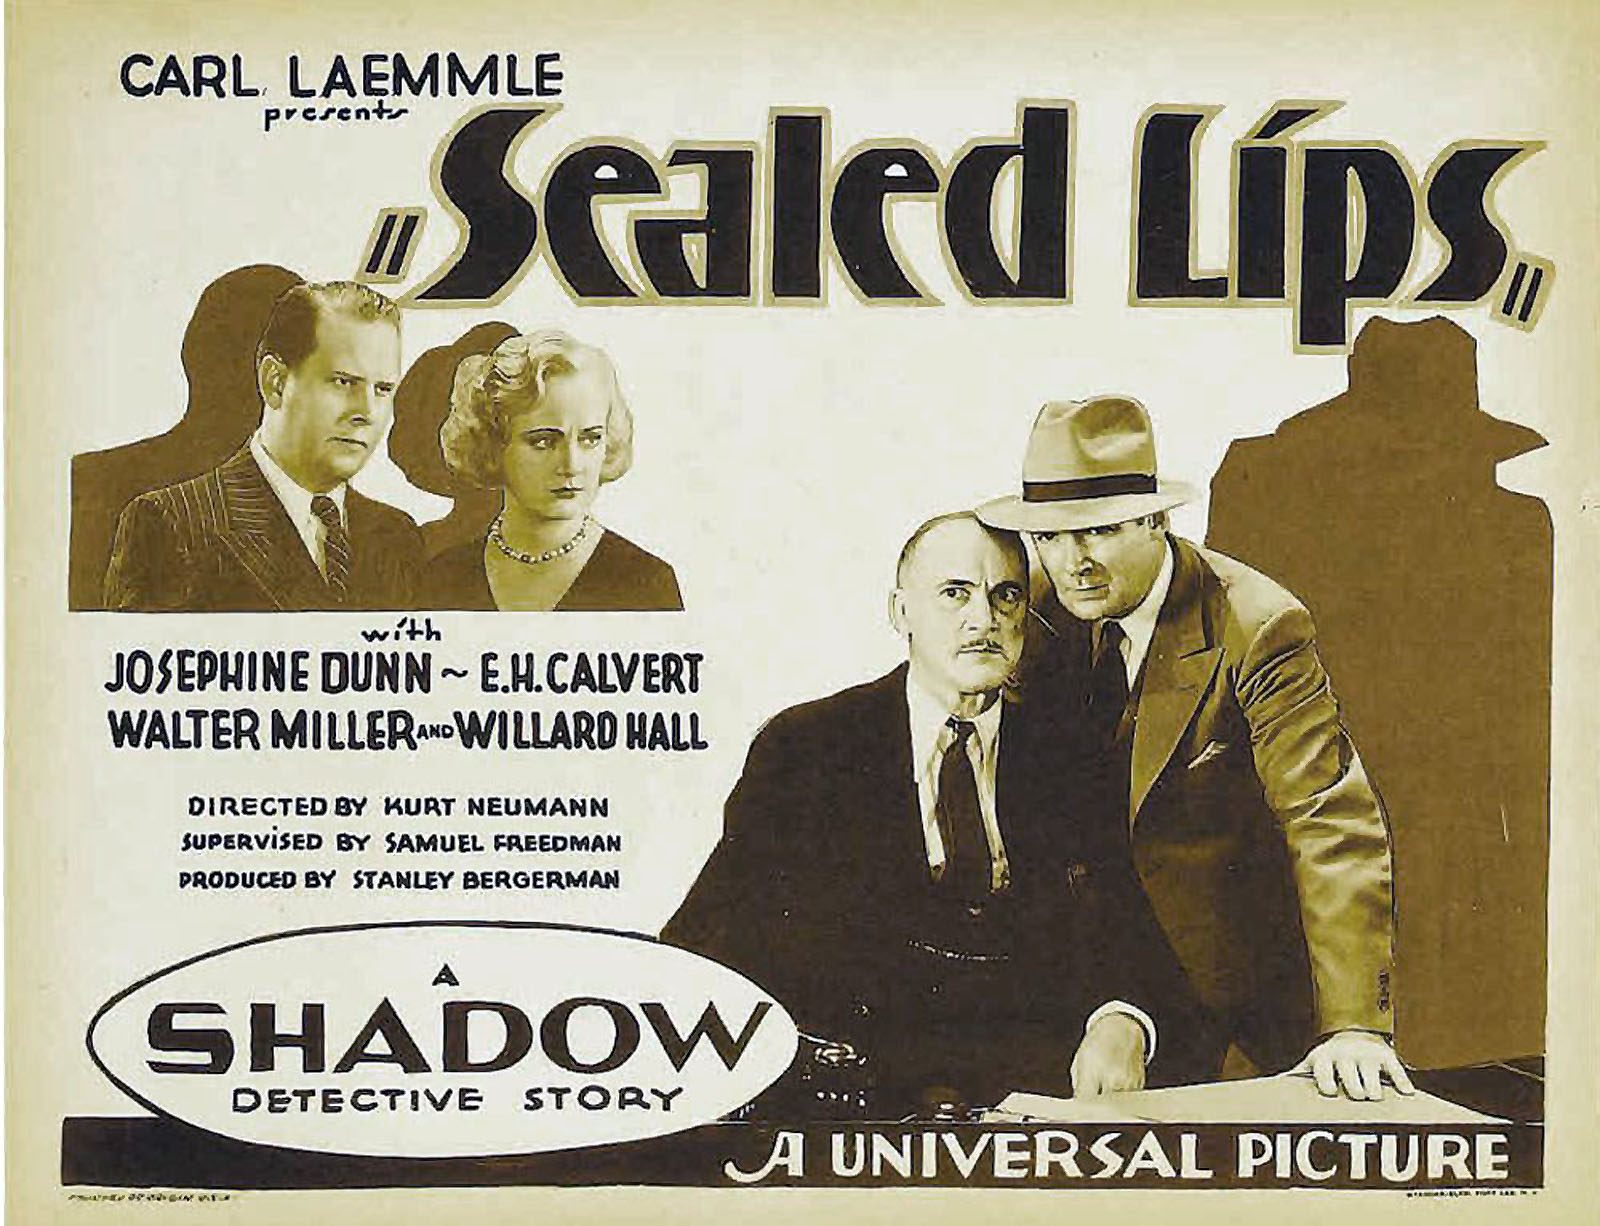 Shadow 3: The Sealed Lips